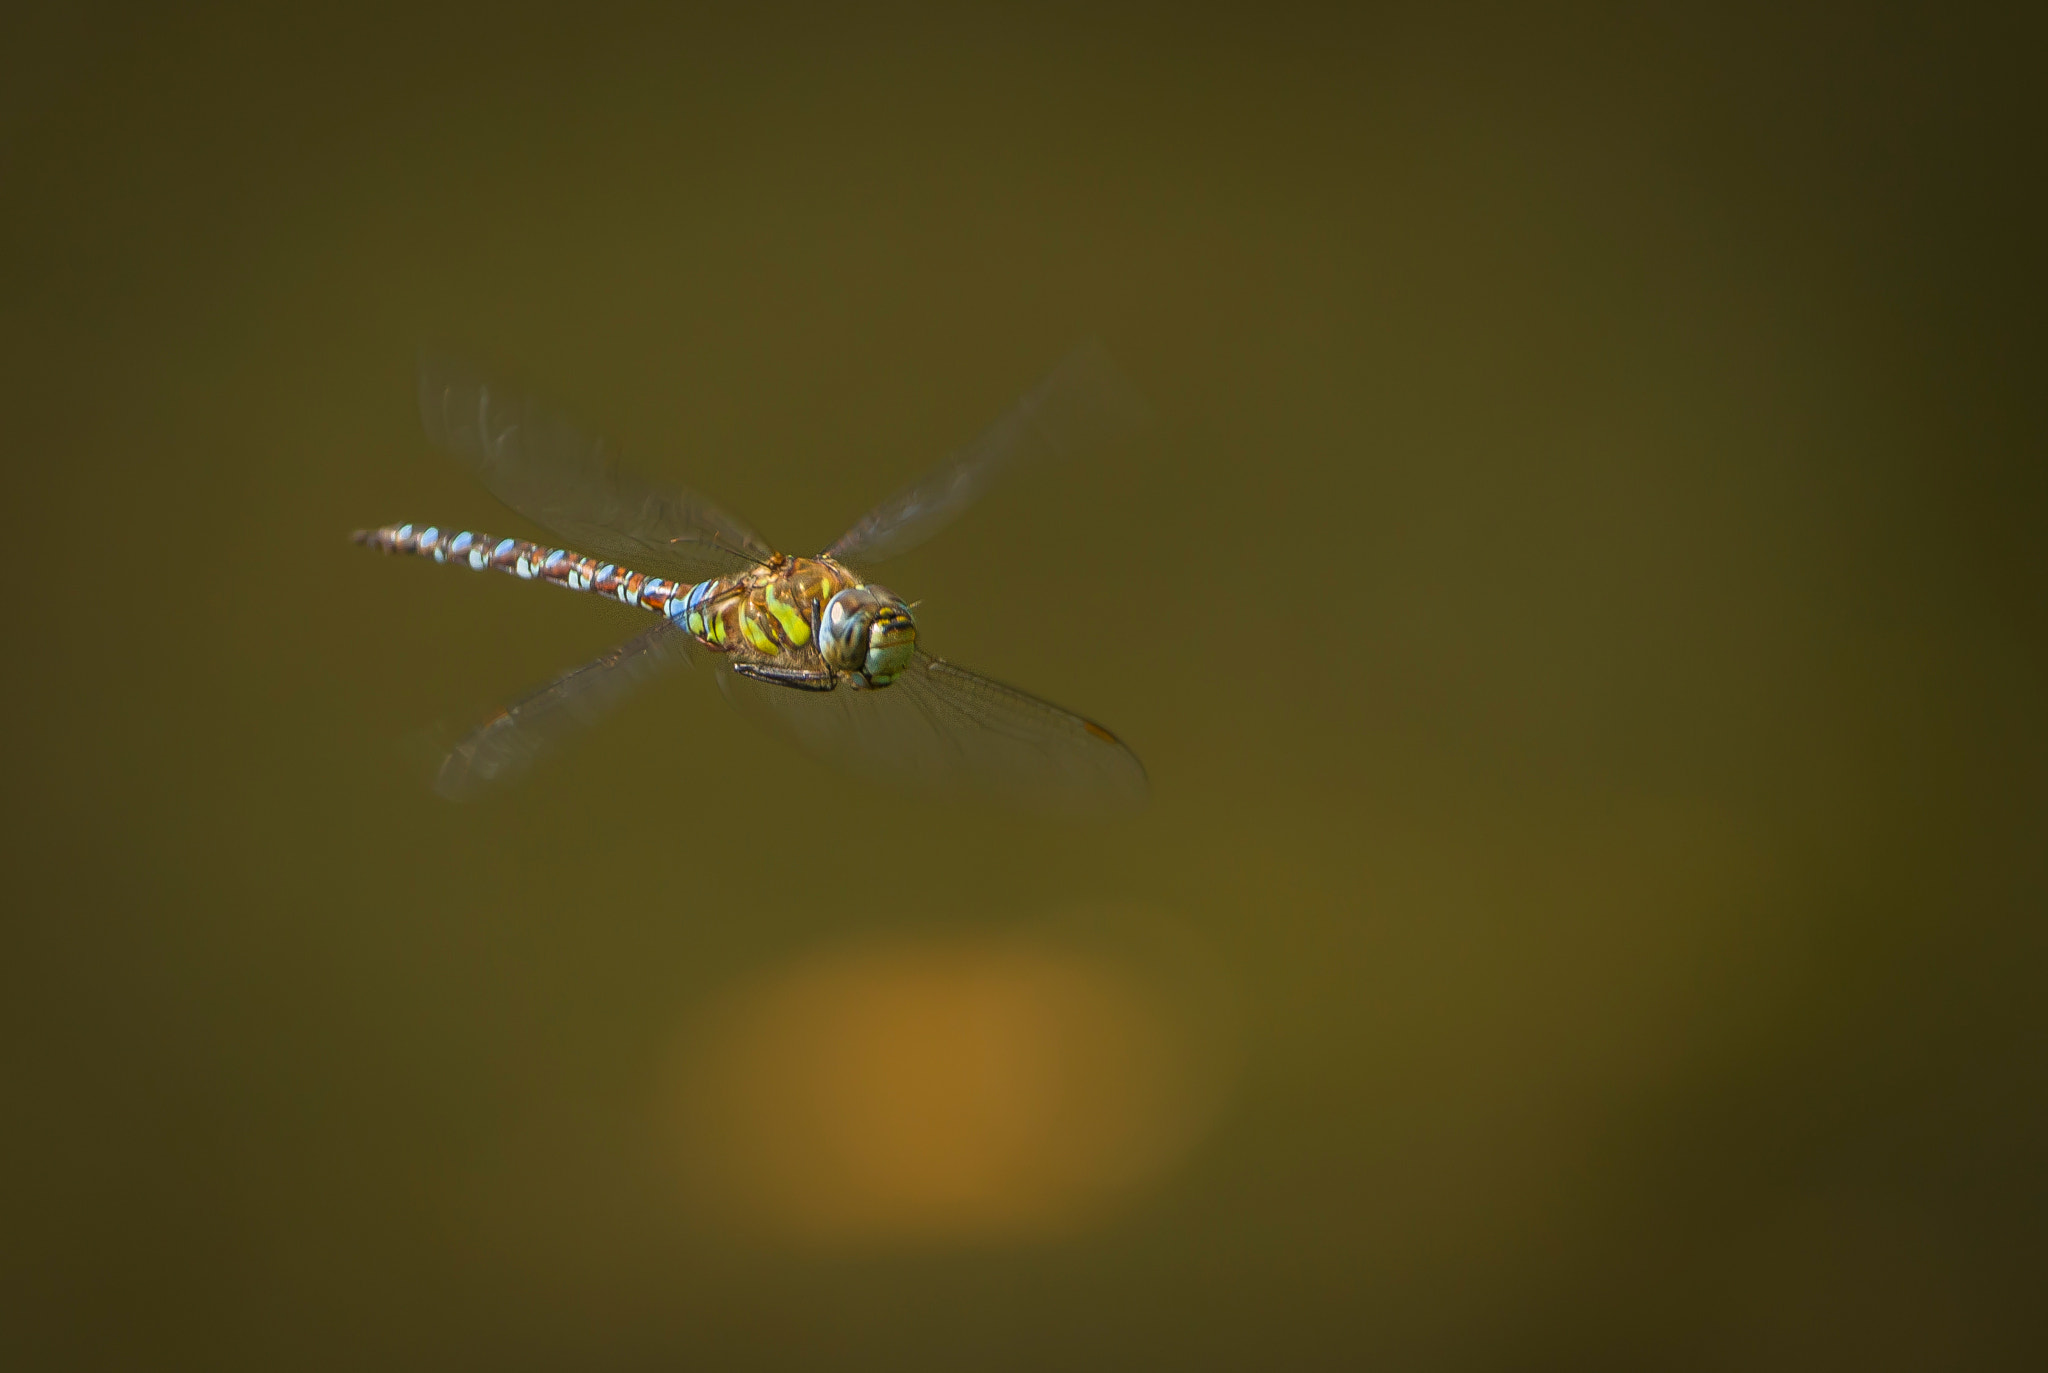 Nikon D5100 + Sigma 150-600mm F5-6.3 DG OS HSM | C sample photo. Southern hawker dragonfly photography